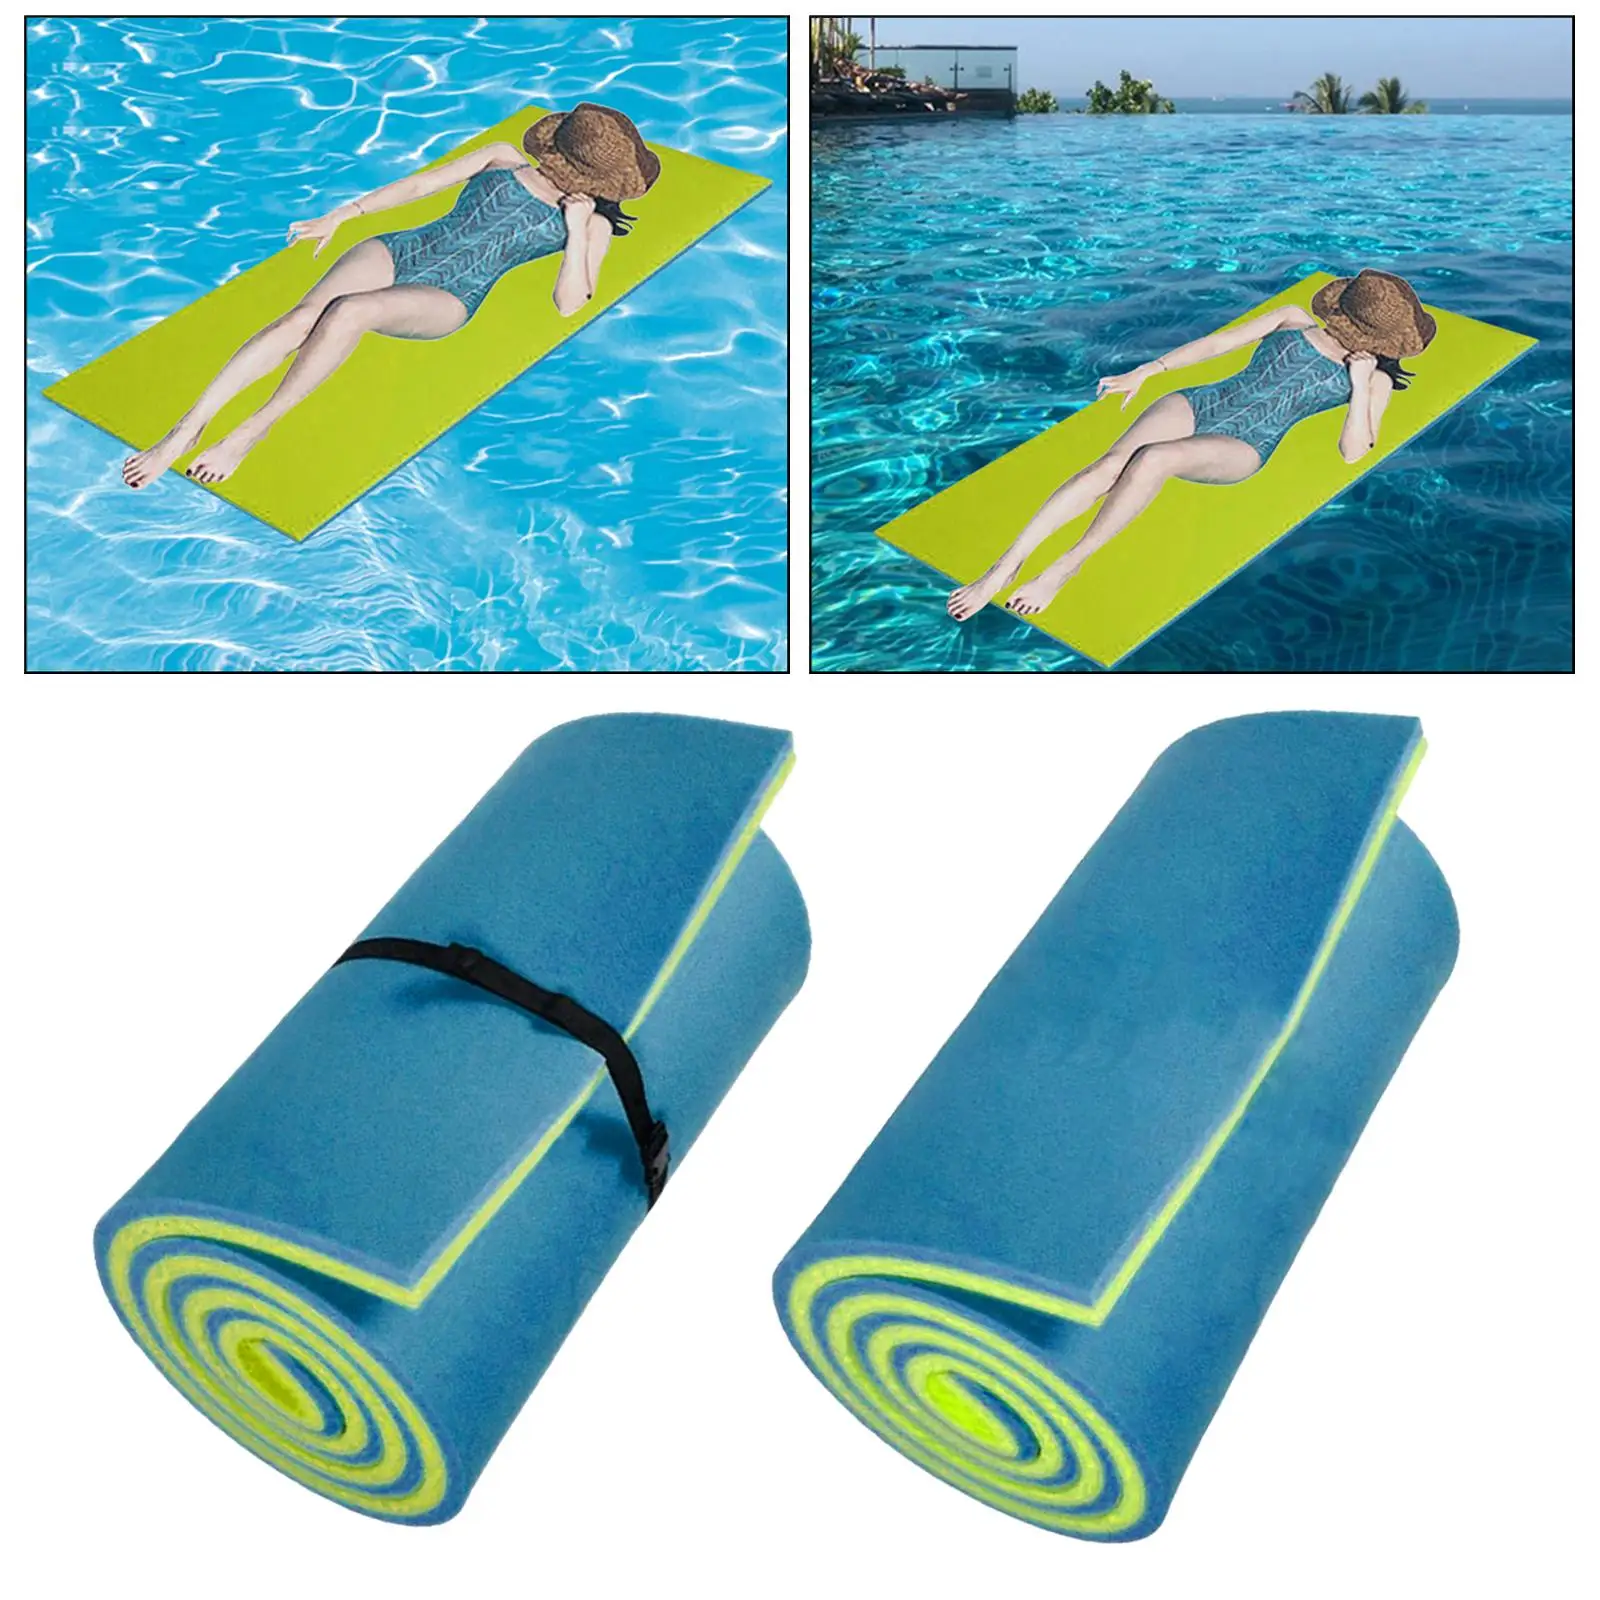 Water Floating Mat Drifting Mattress Pool Floating Raft High Density Floating Pad for Outside Beach Boating Swimming Pool Summer